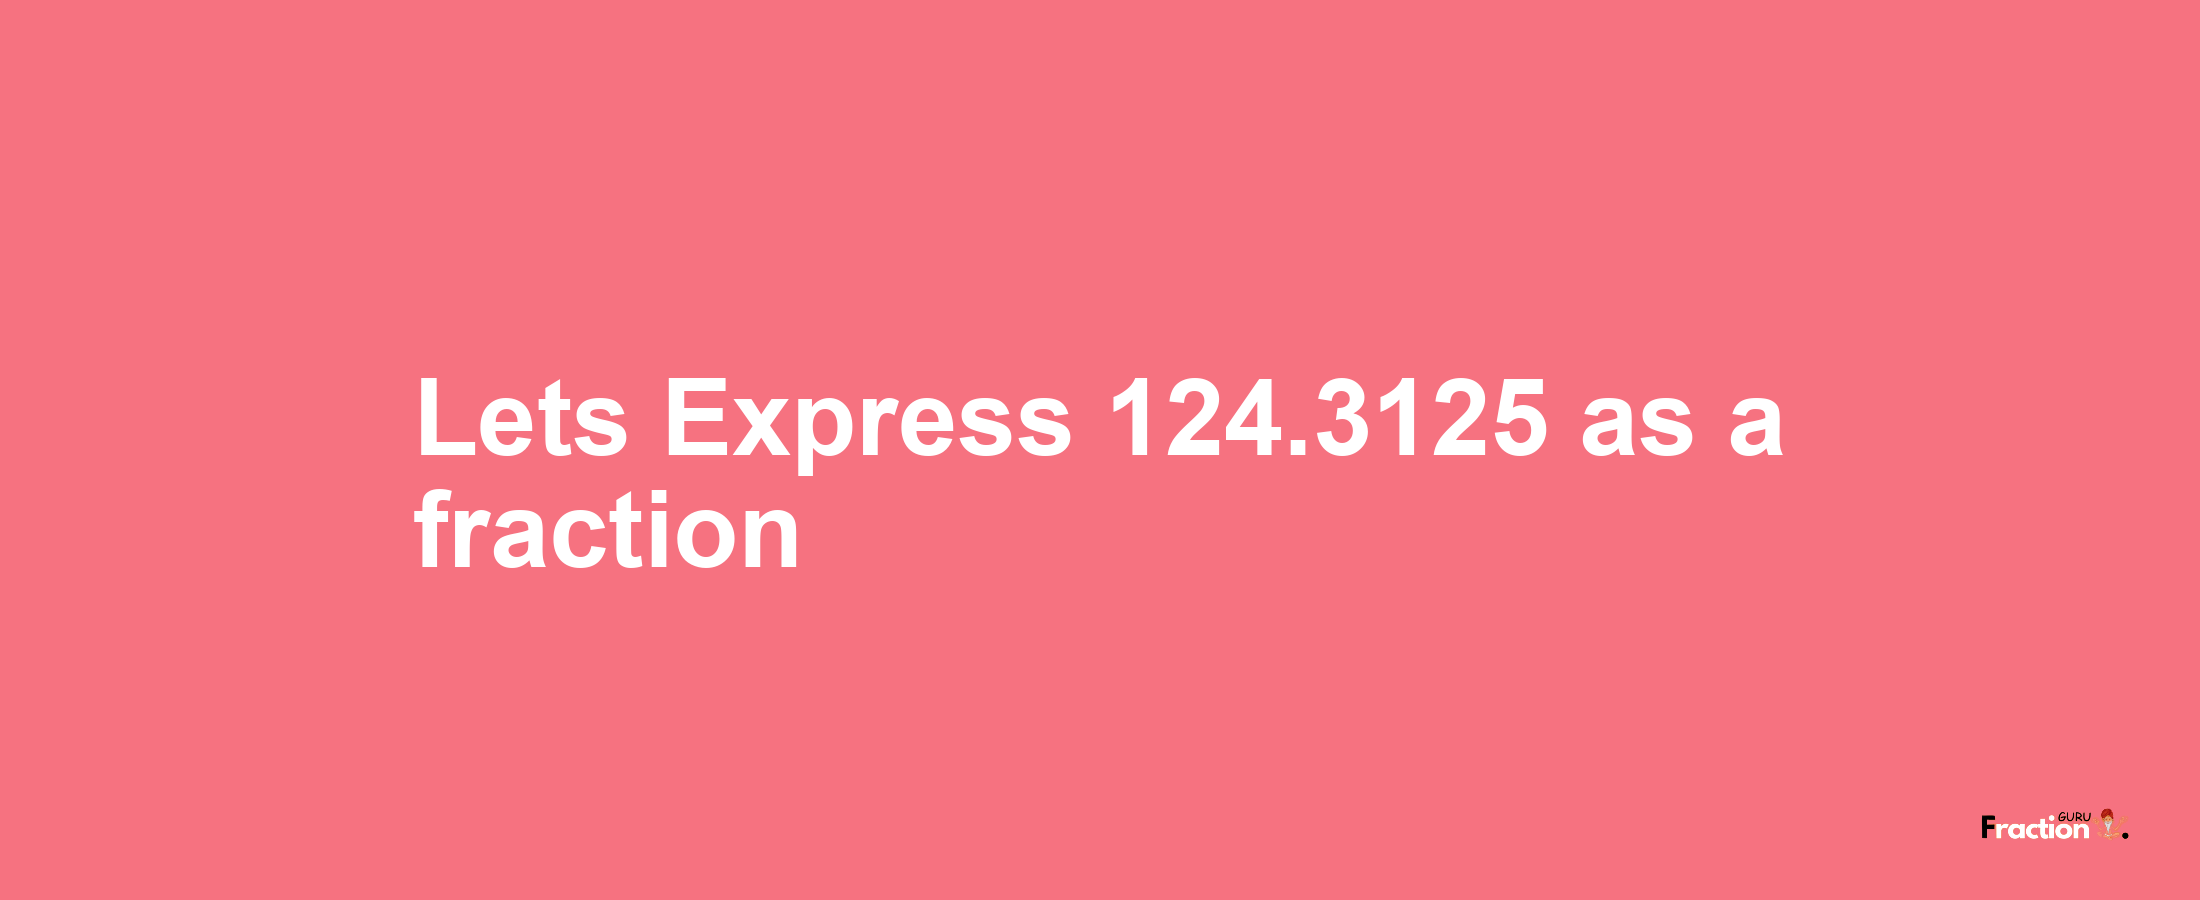 Lets Express 124.3125 as afraction